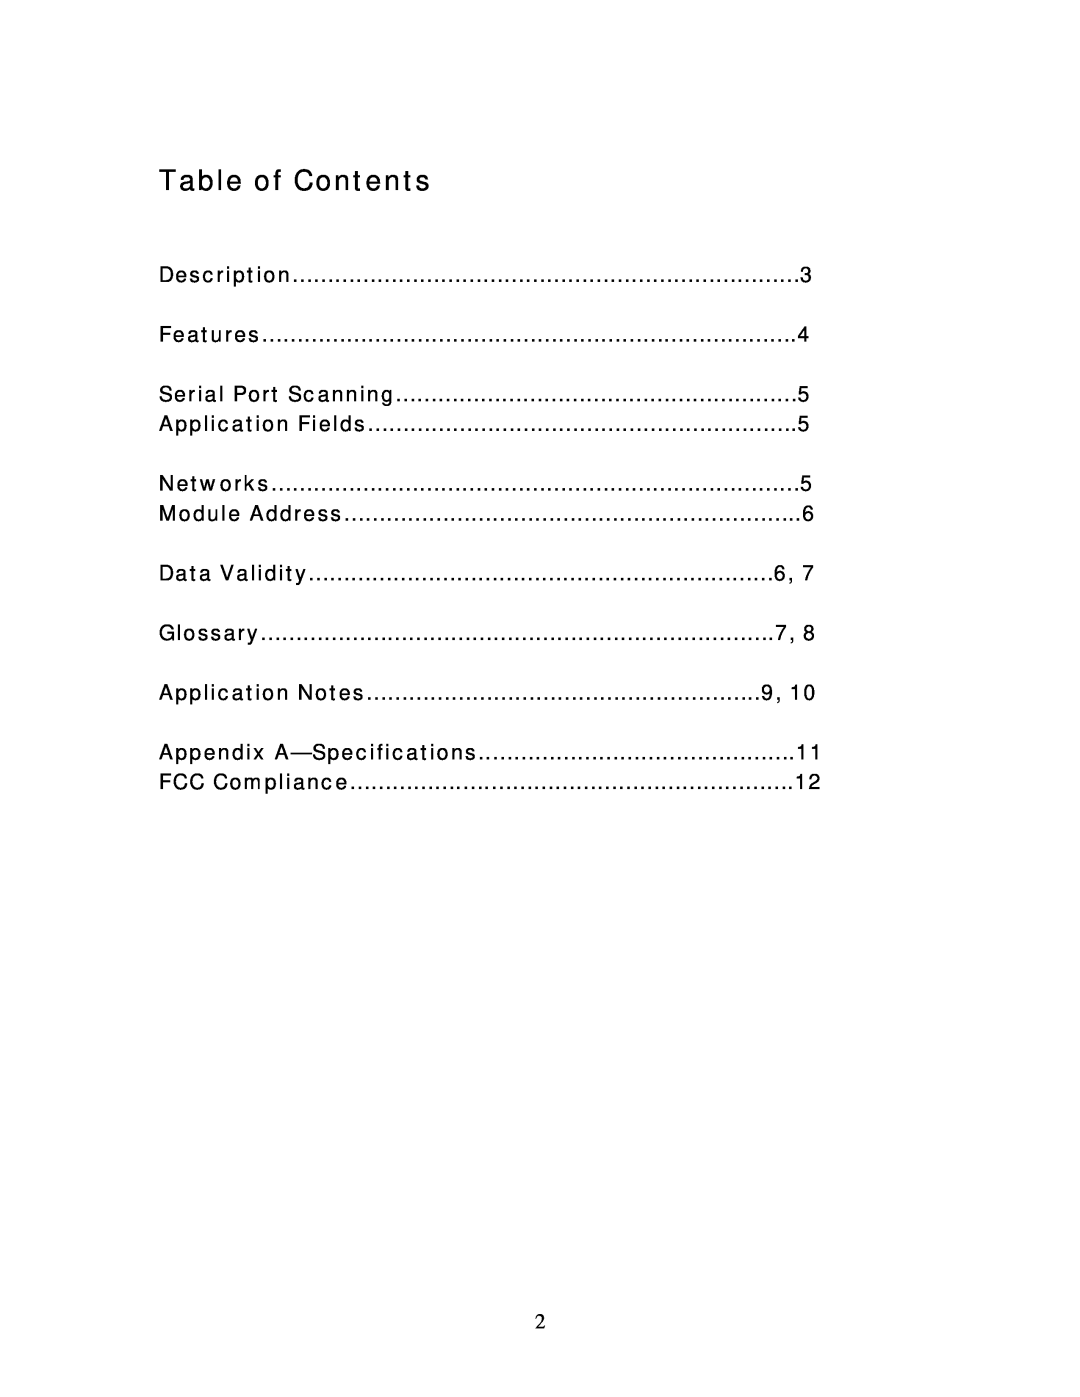 Black Box MDR210A-485 manual Table of Contents 